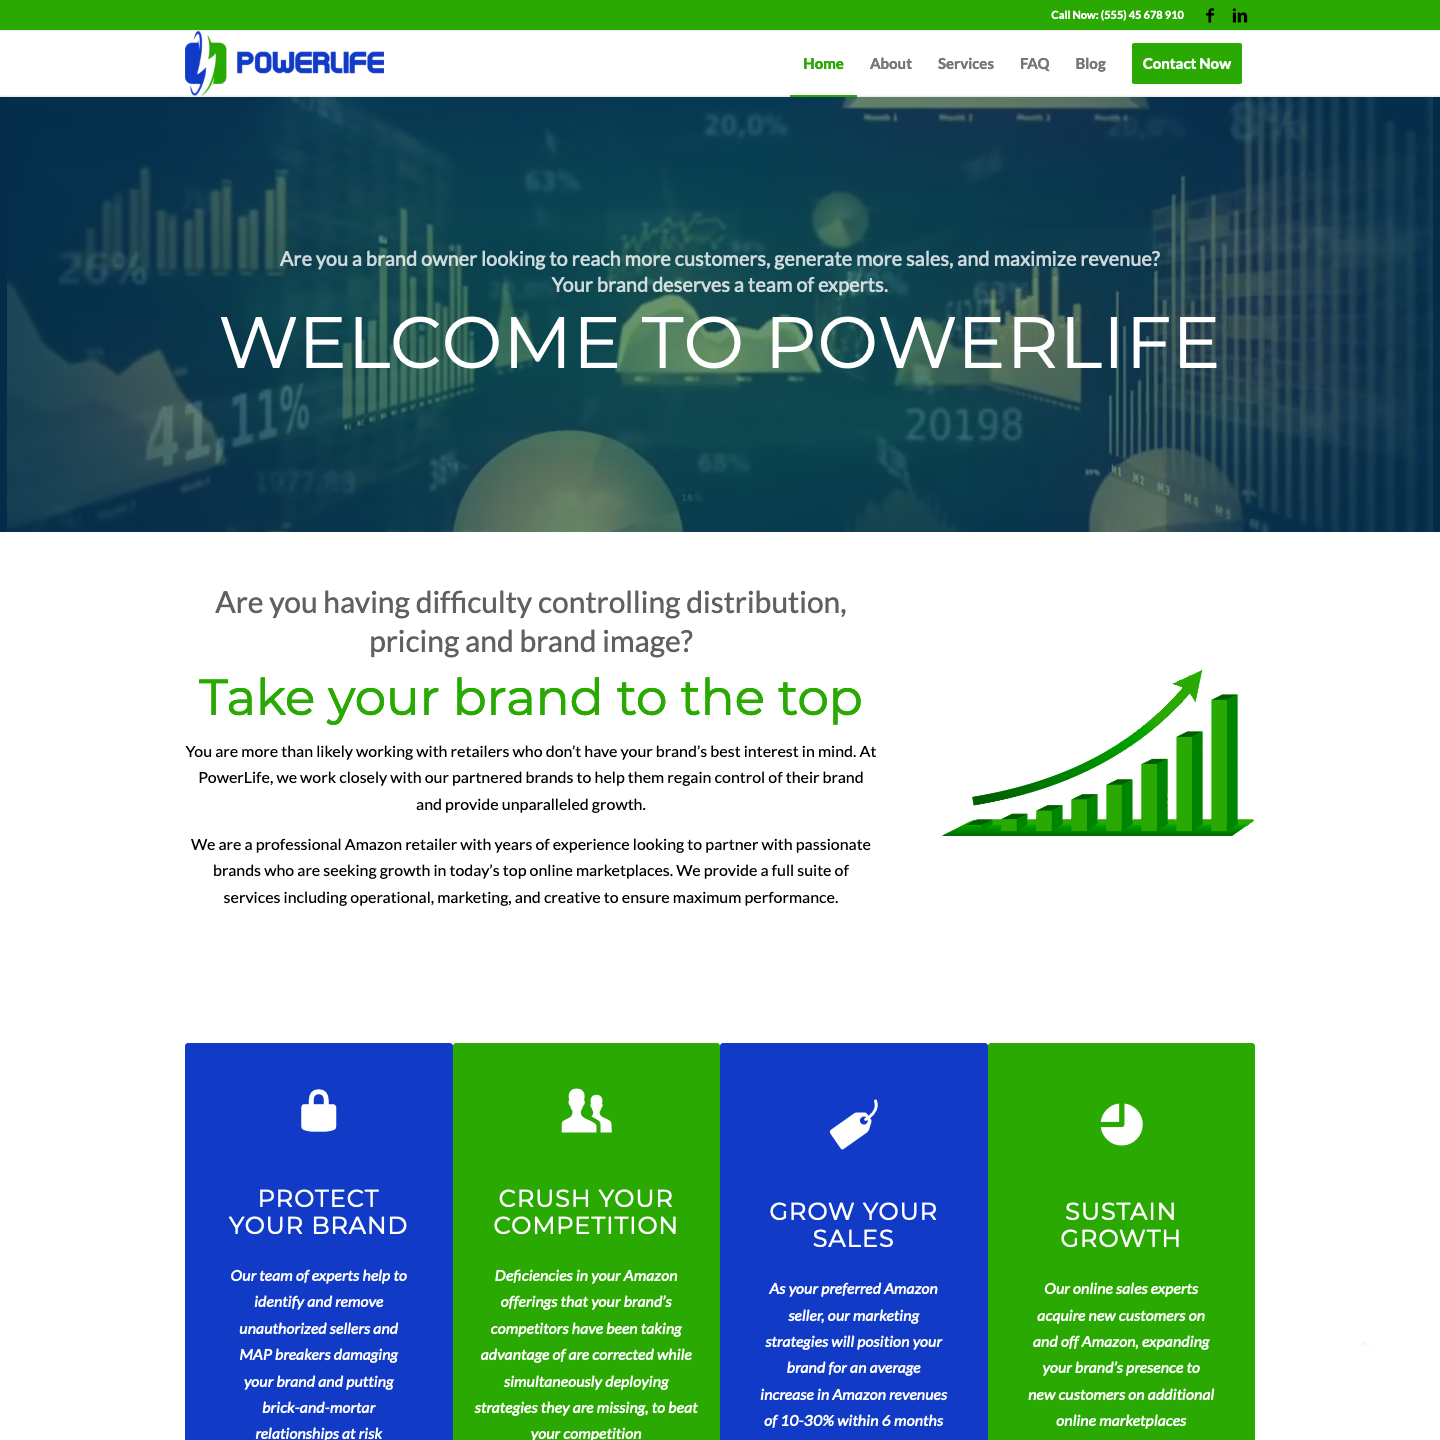 The power life store